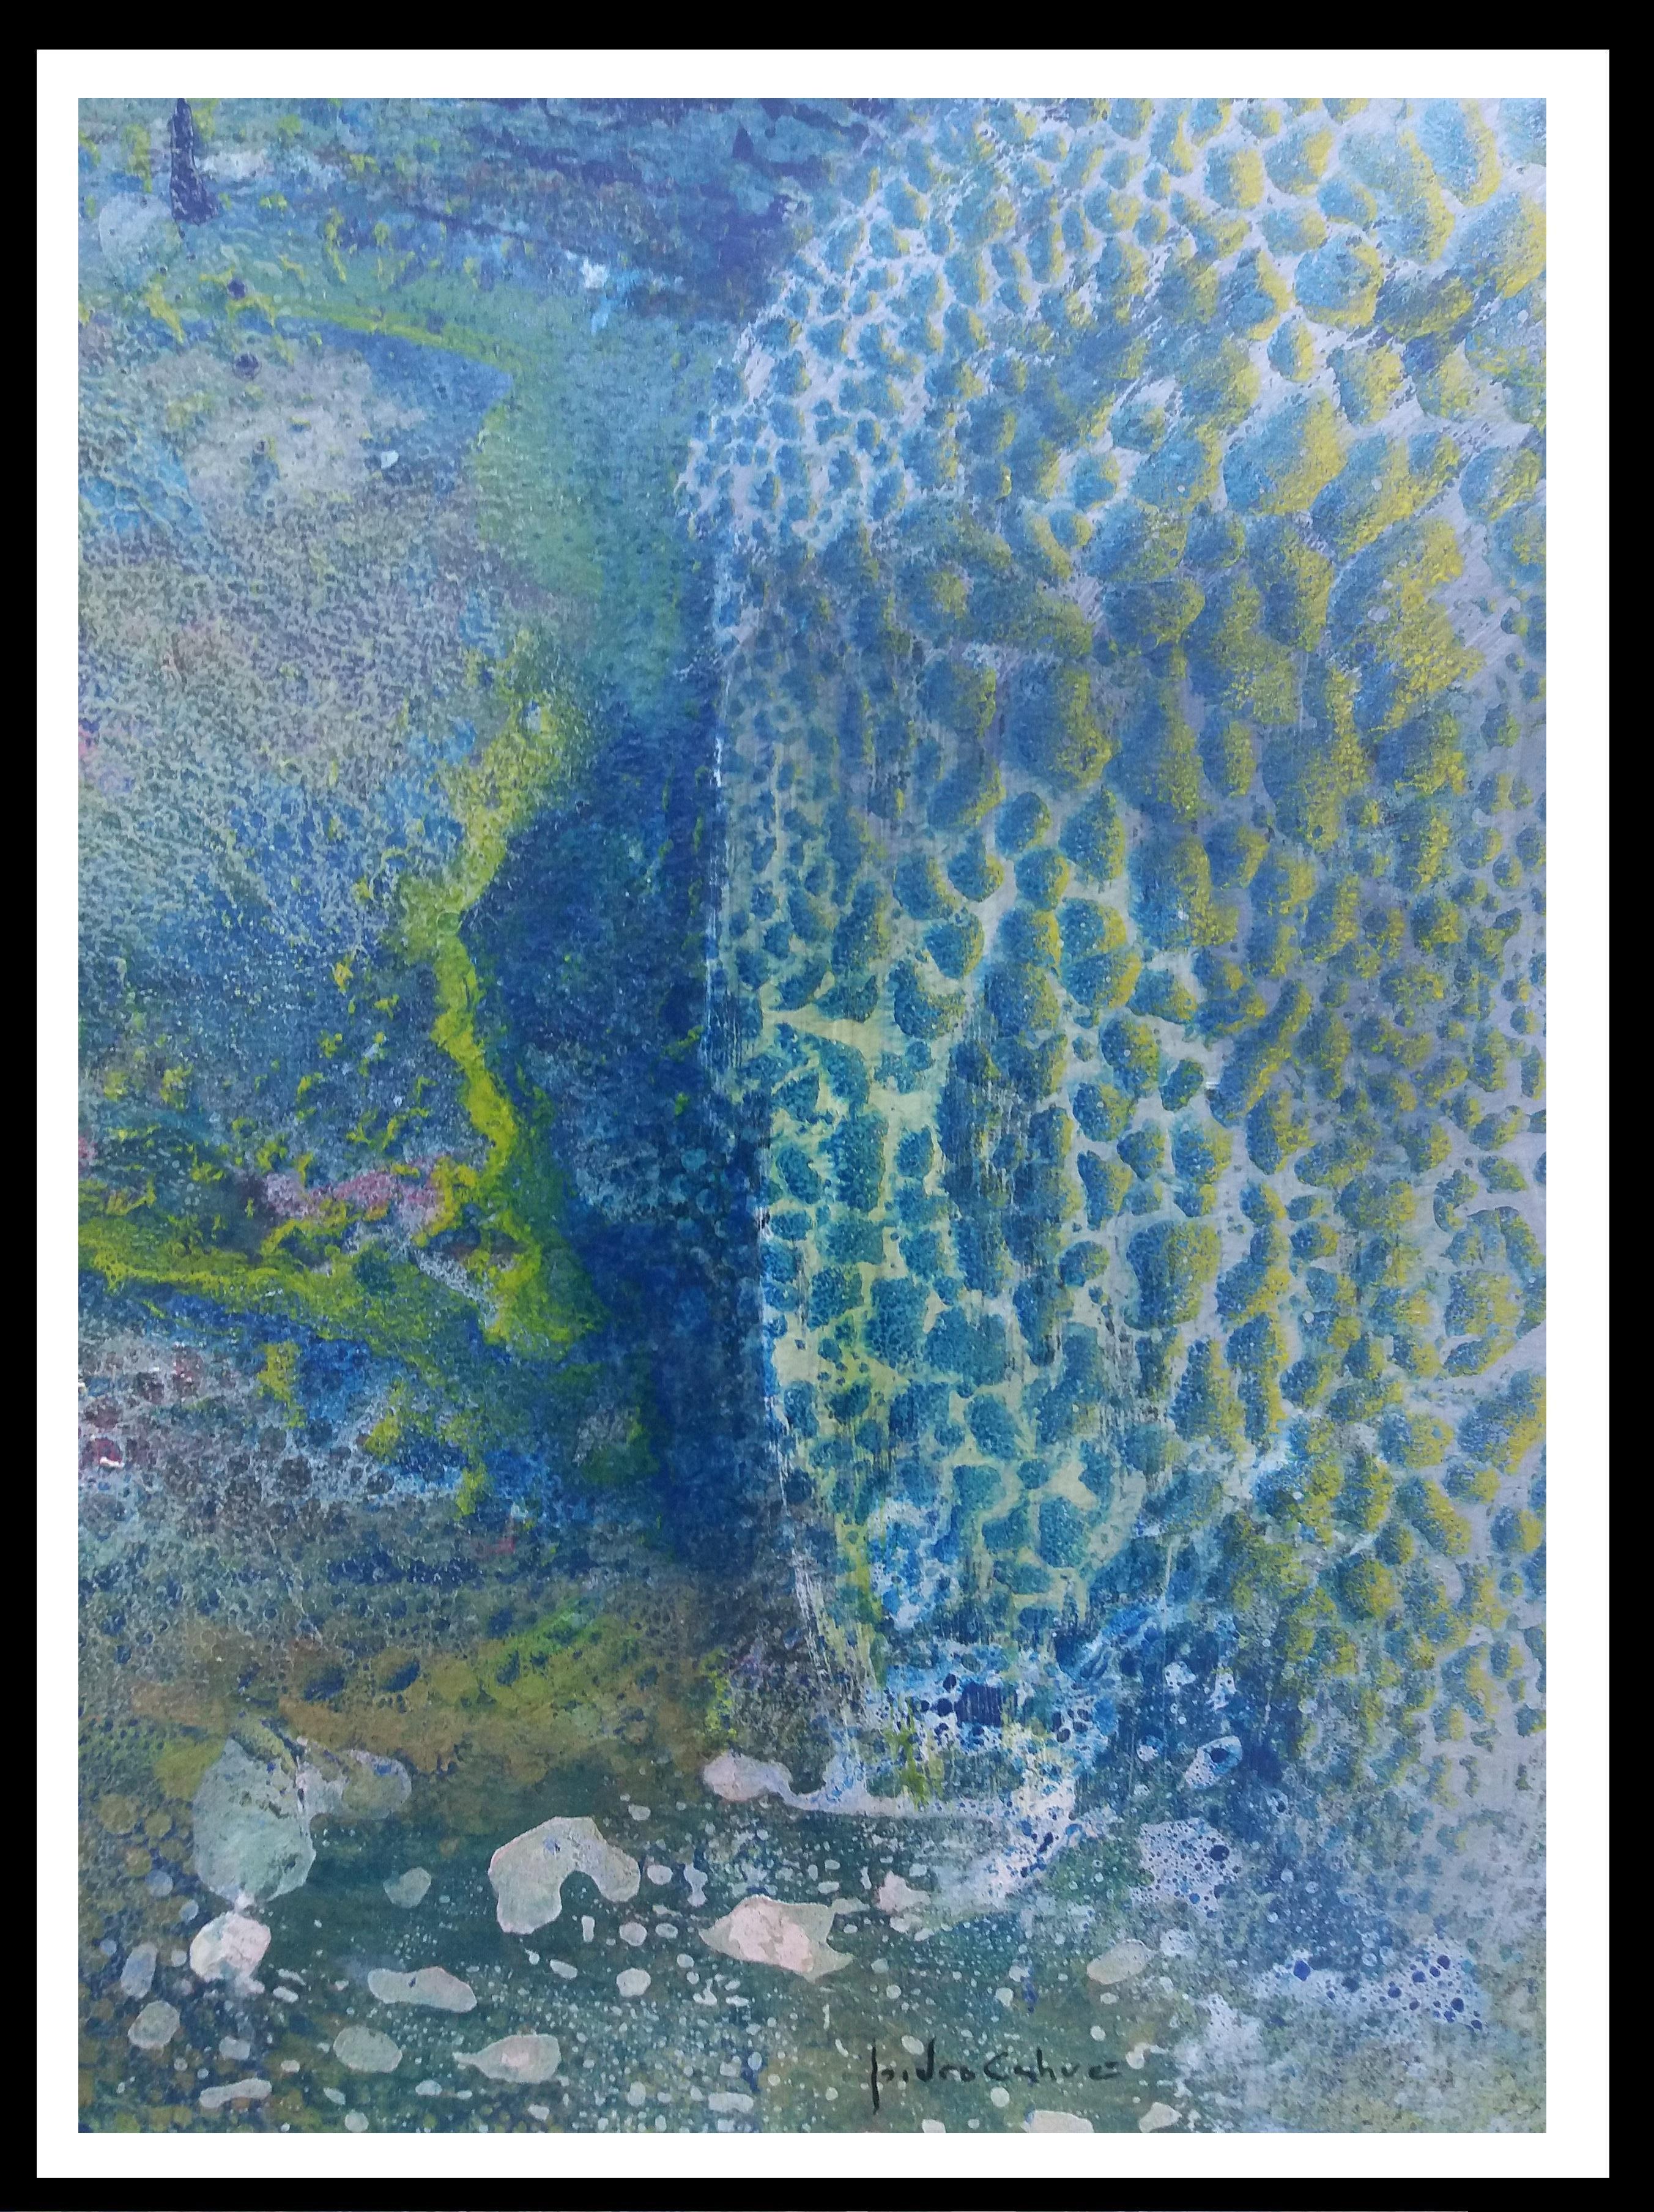 Isidro Cahue Abstract Painting -  I. Cahue  40 Vertical  Blue Drops Effect    original  acrylic paper painting